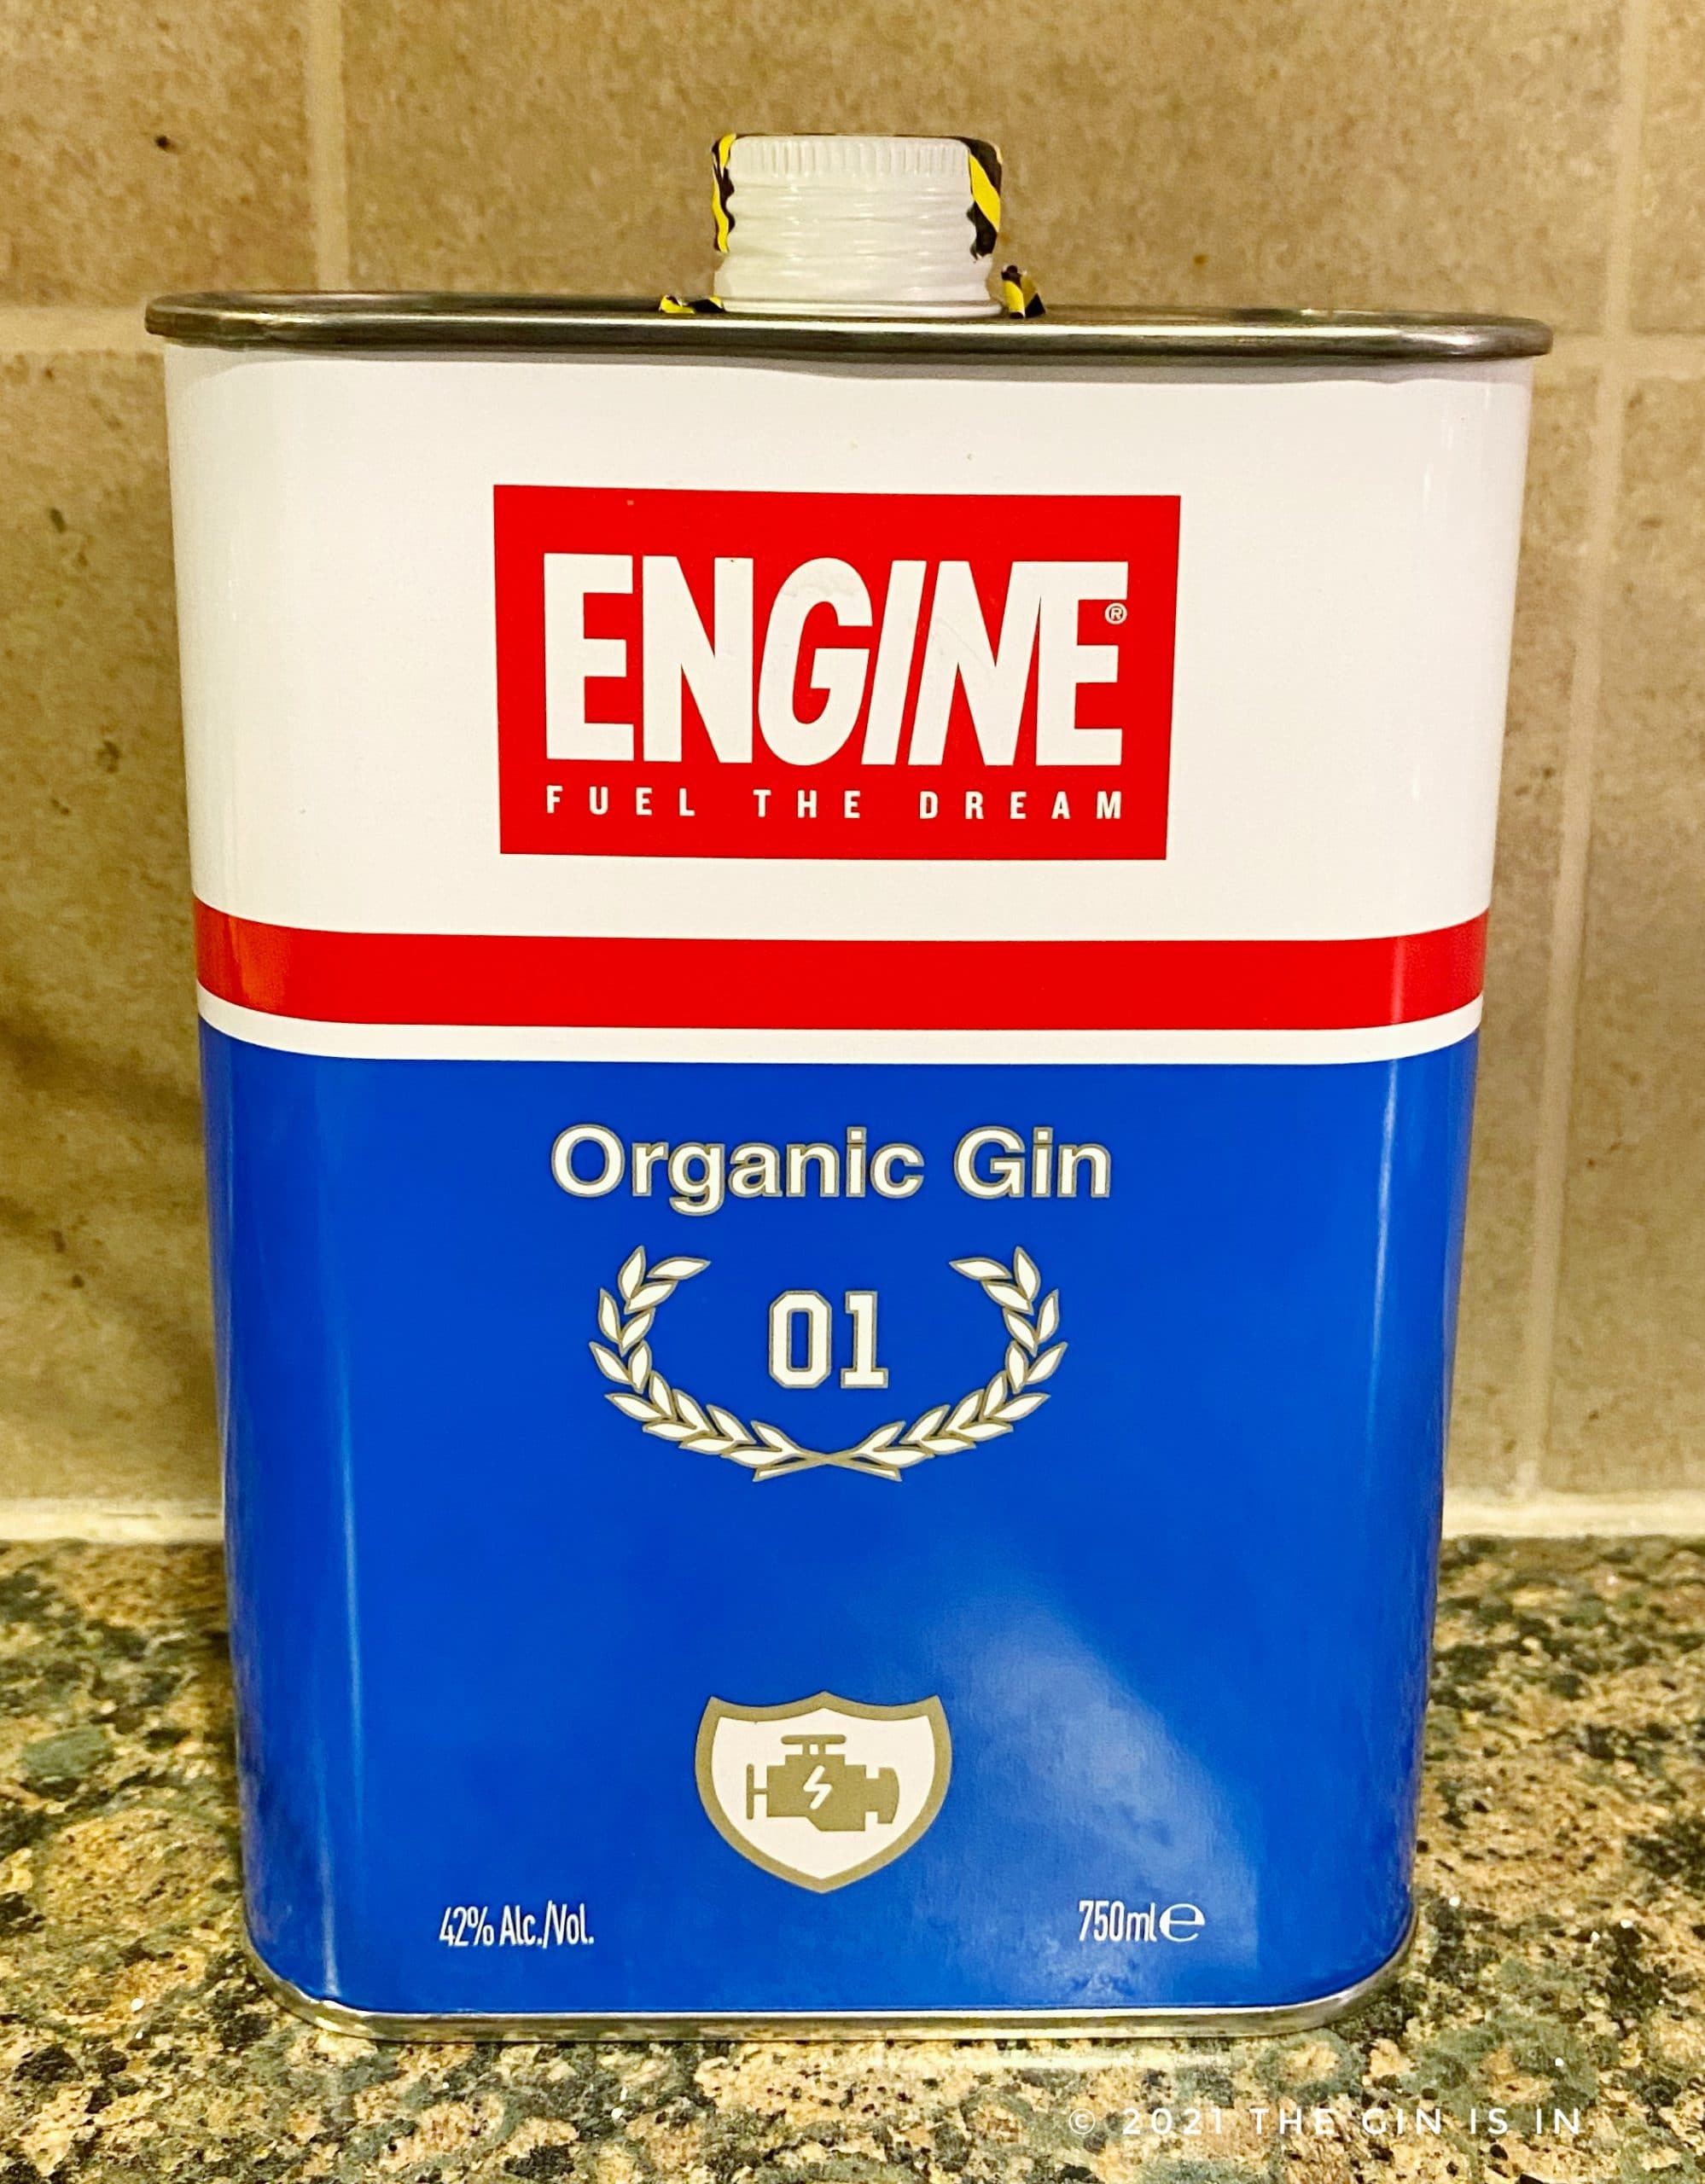 Engine Gin  Expert Gin Review and Tasting Notes